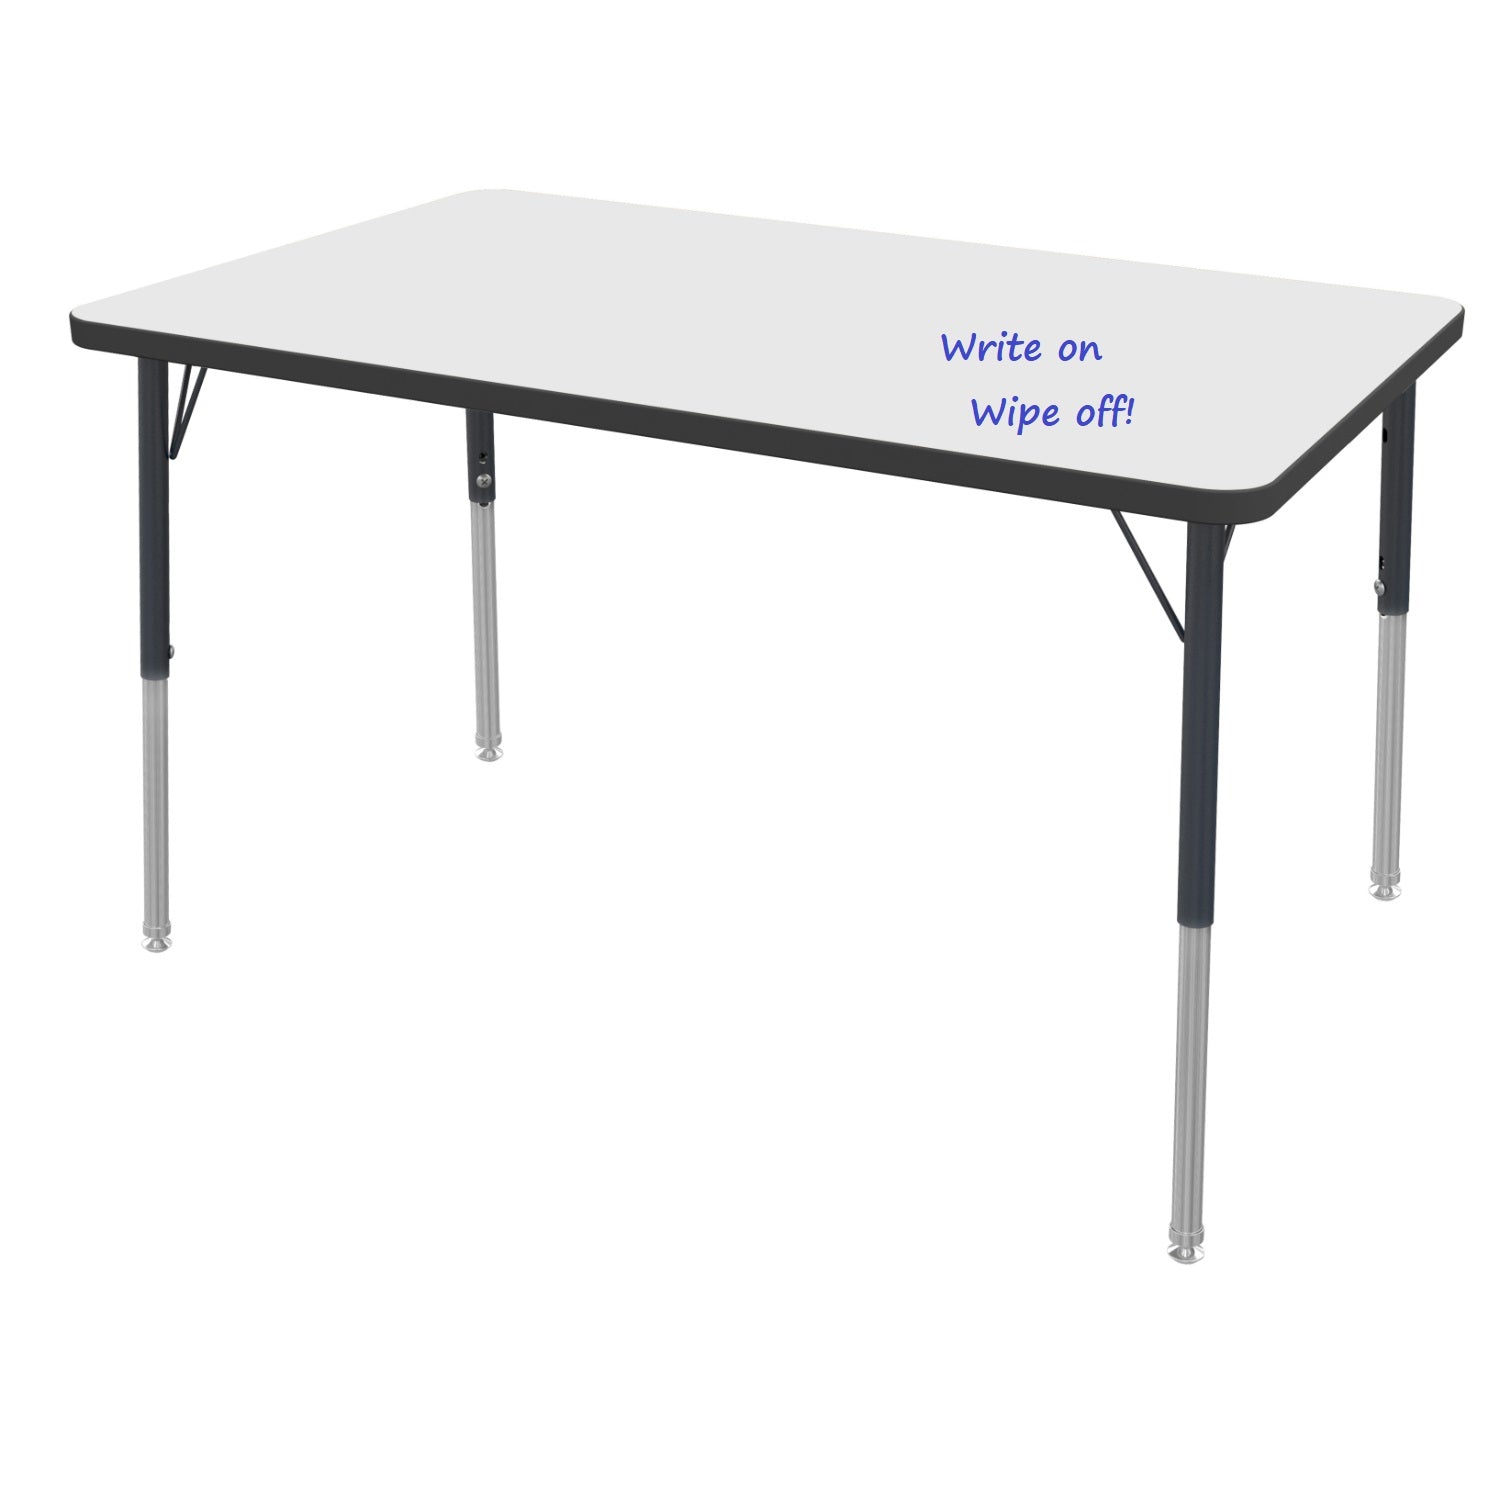 MG Series Adjustable Height Activity Table with White Dry Erase Markerboard Top, 30" x 48" Rectangle